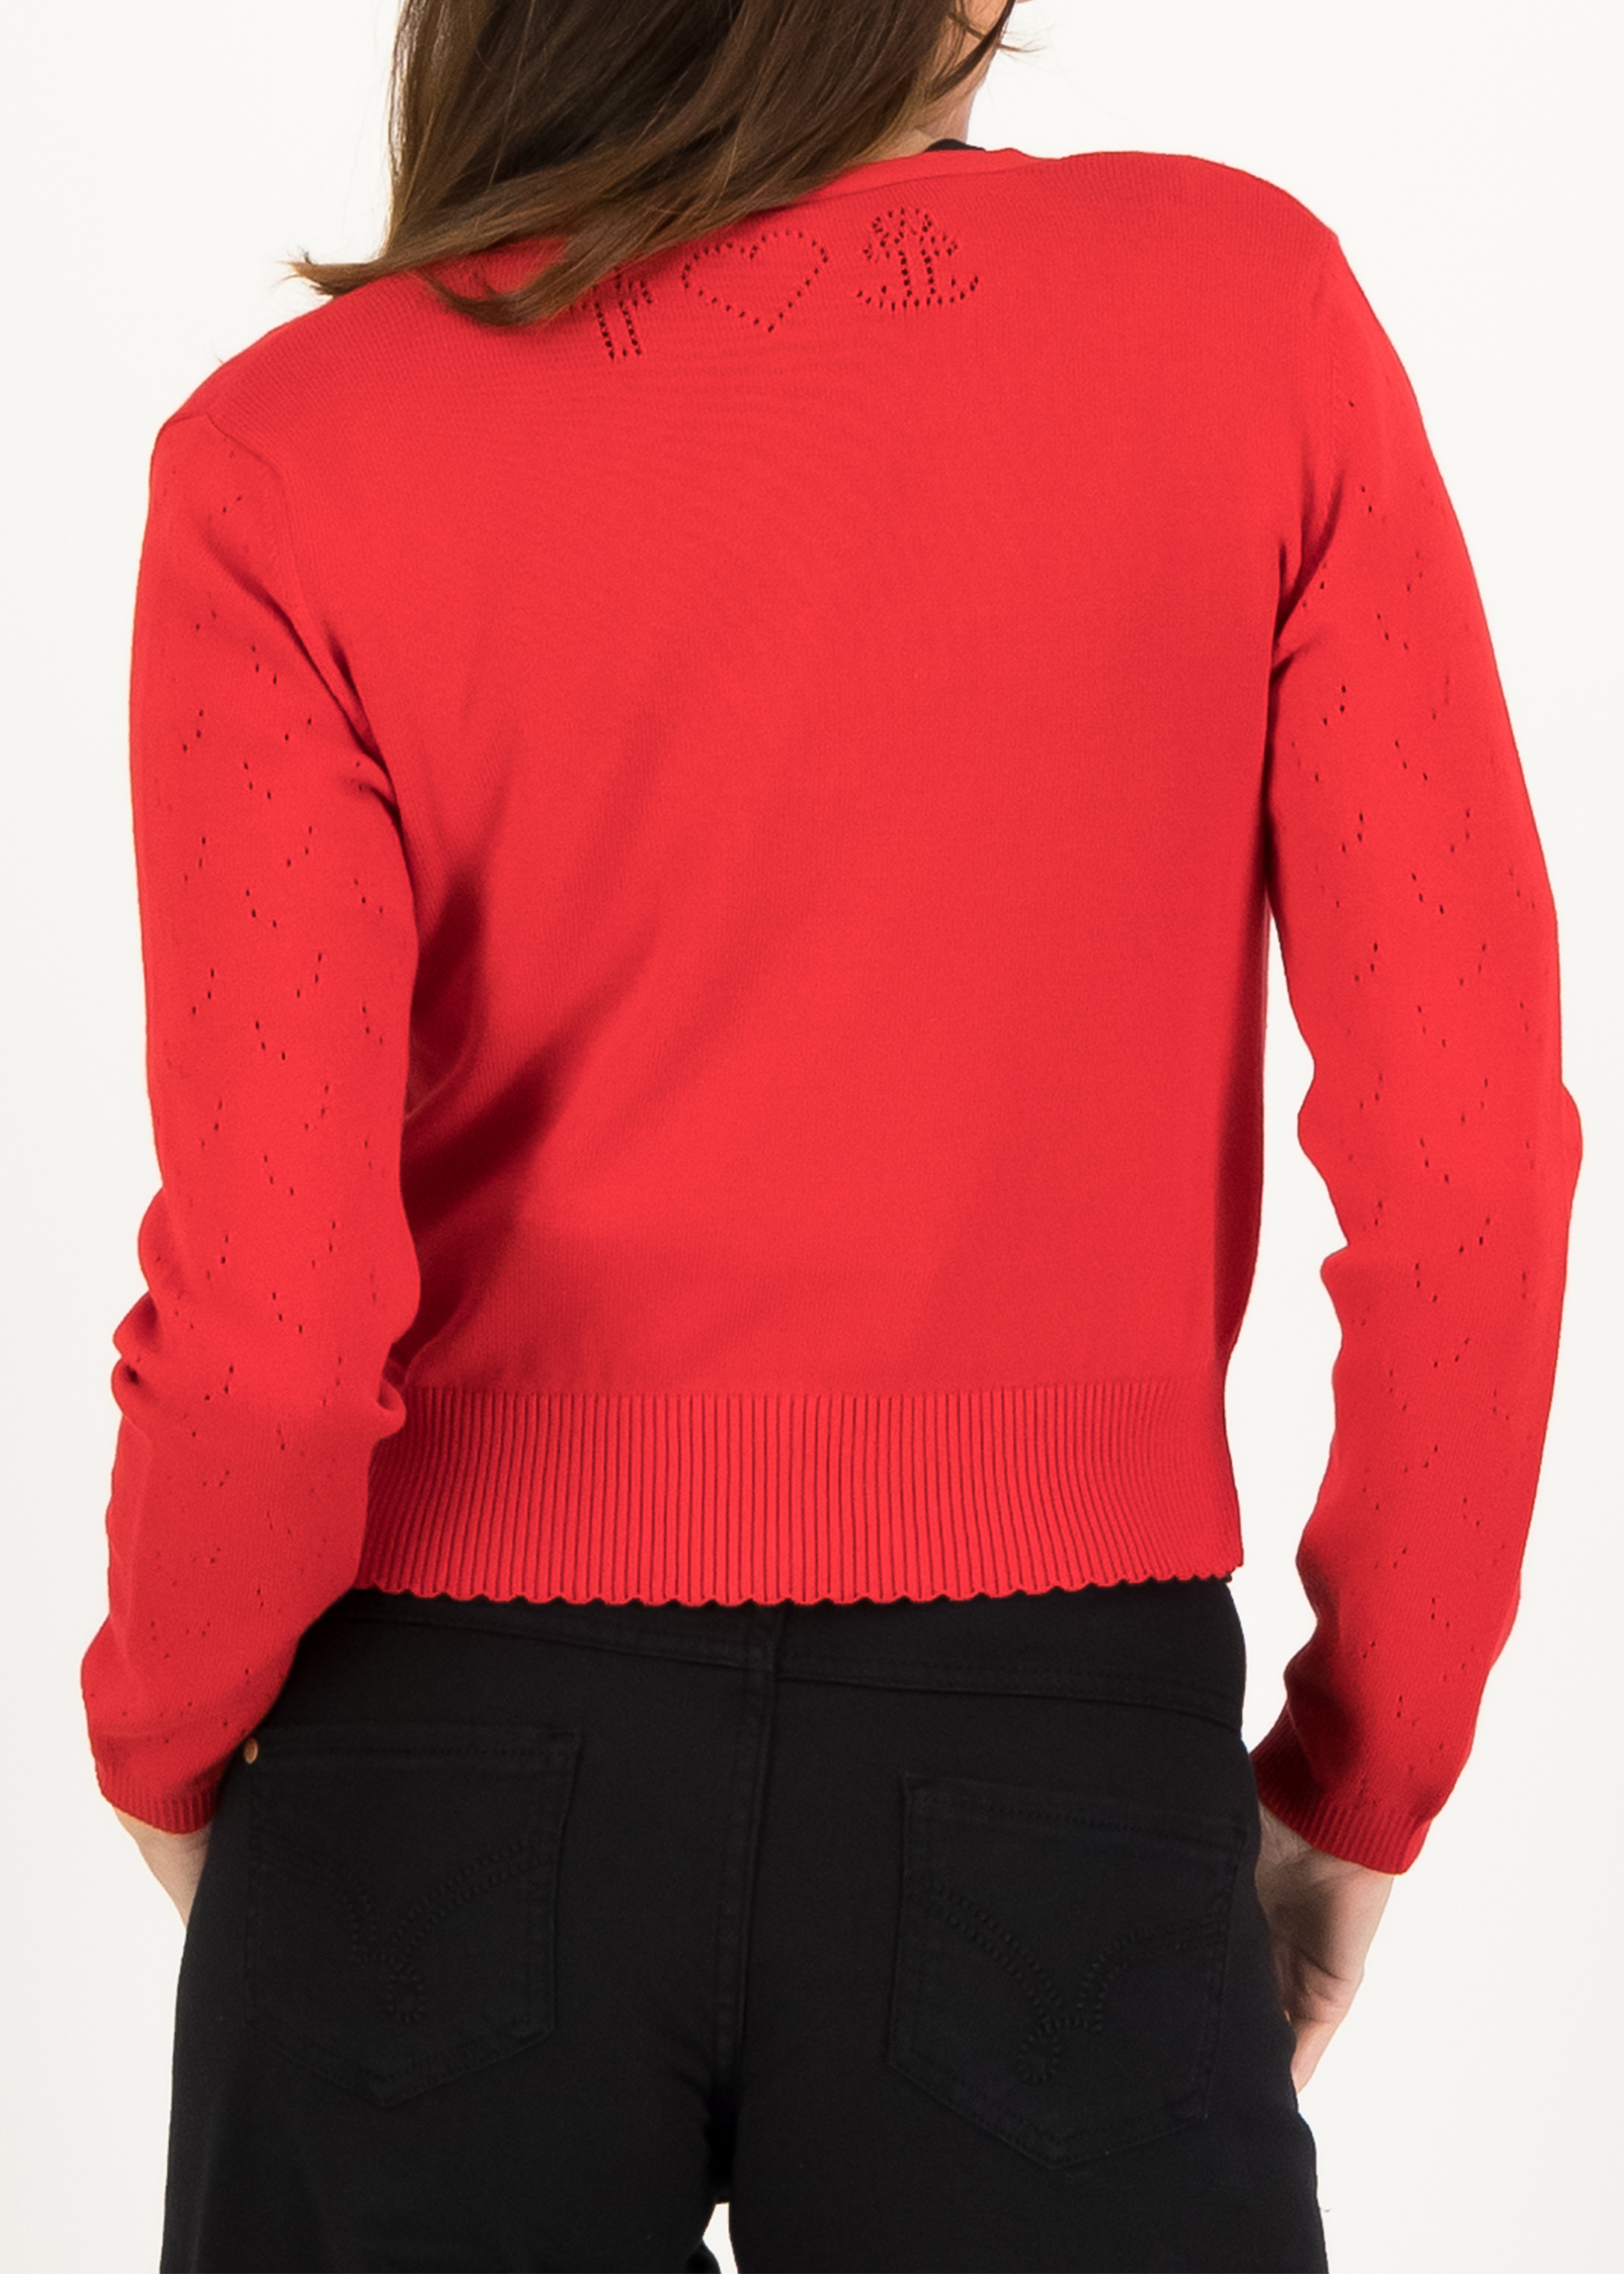 Cardigan Save the World -  stunningly red knit